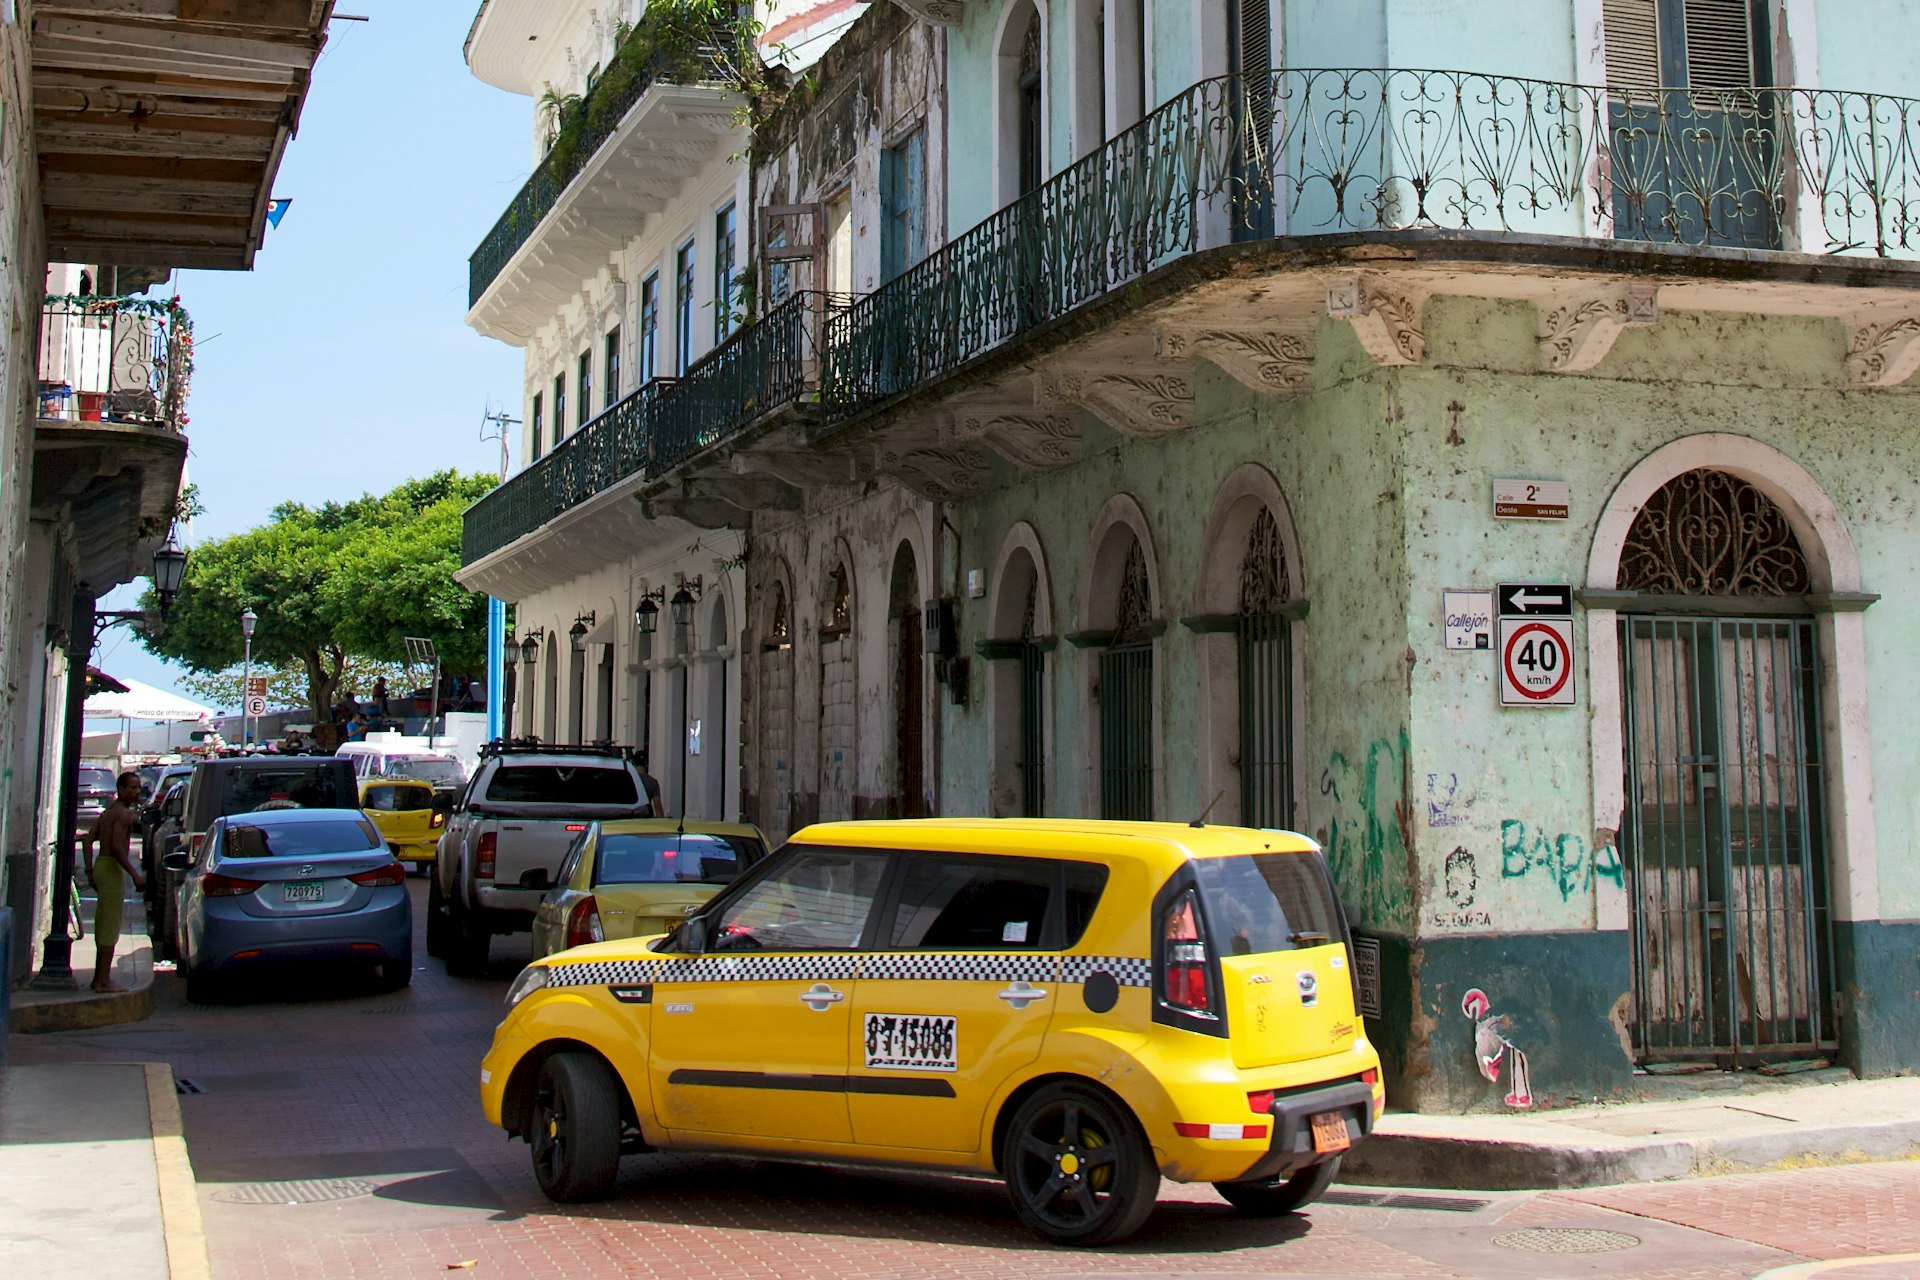 A taxi turning down a narrow street in Casco Viejo, the historic district of Panama City Panama